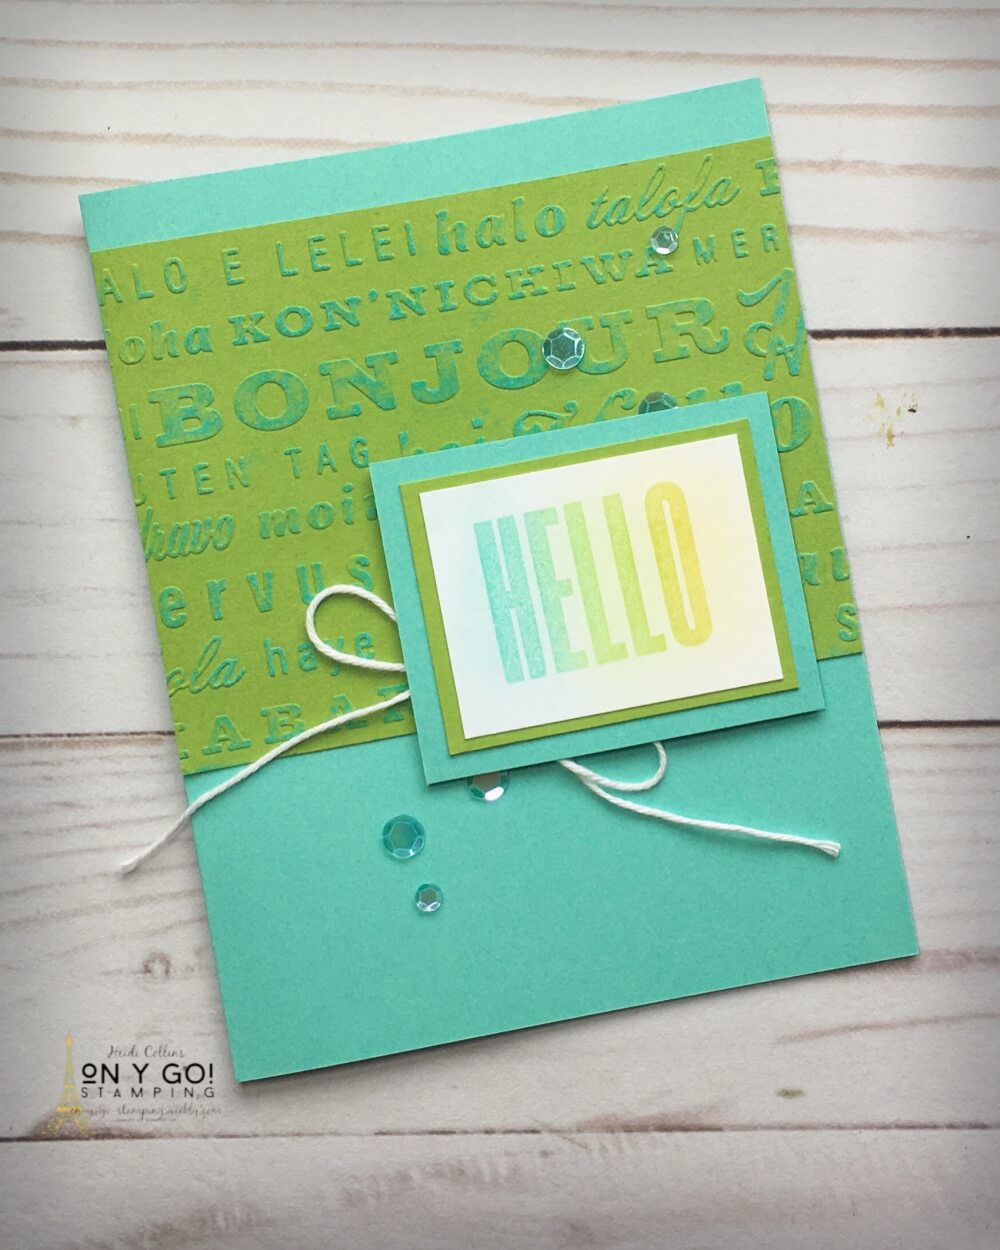 Remember doing the Poppin' Pastels technique on cards back in the day? See how to use Stampin' Up!'s soft pastels to do this technique and more on a fun thank you card.